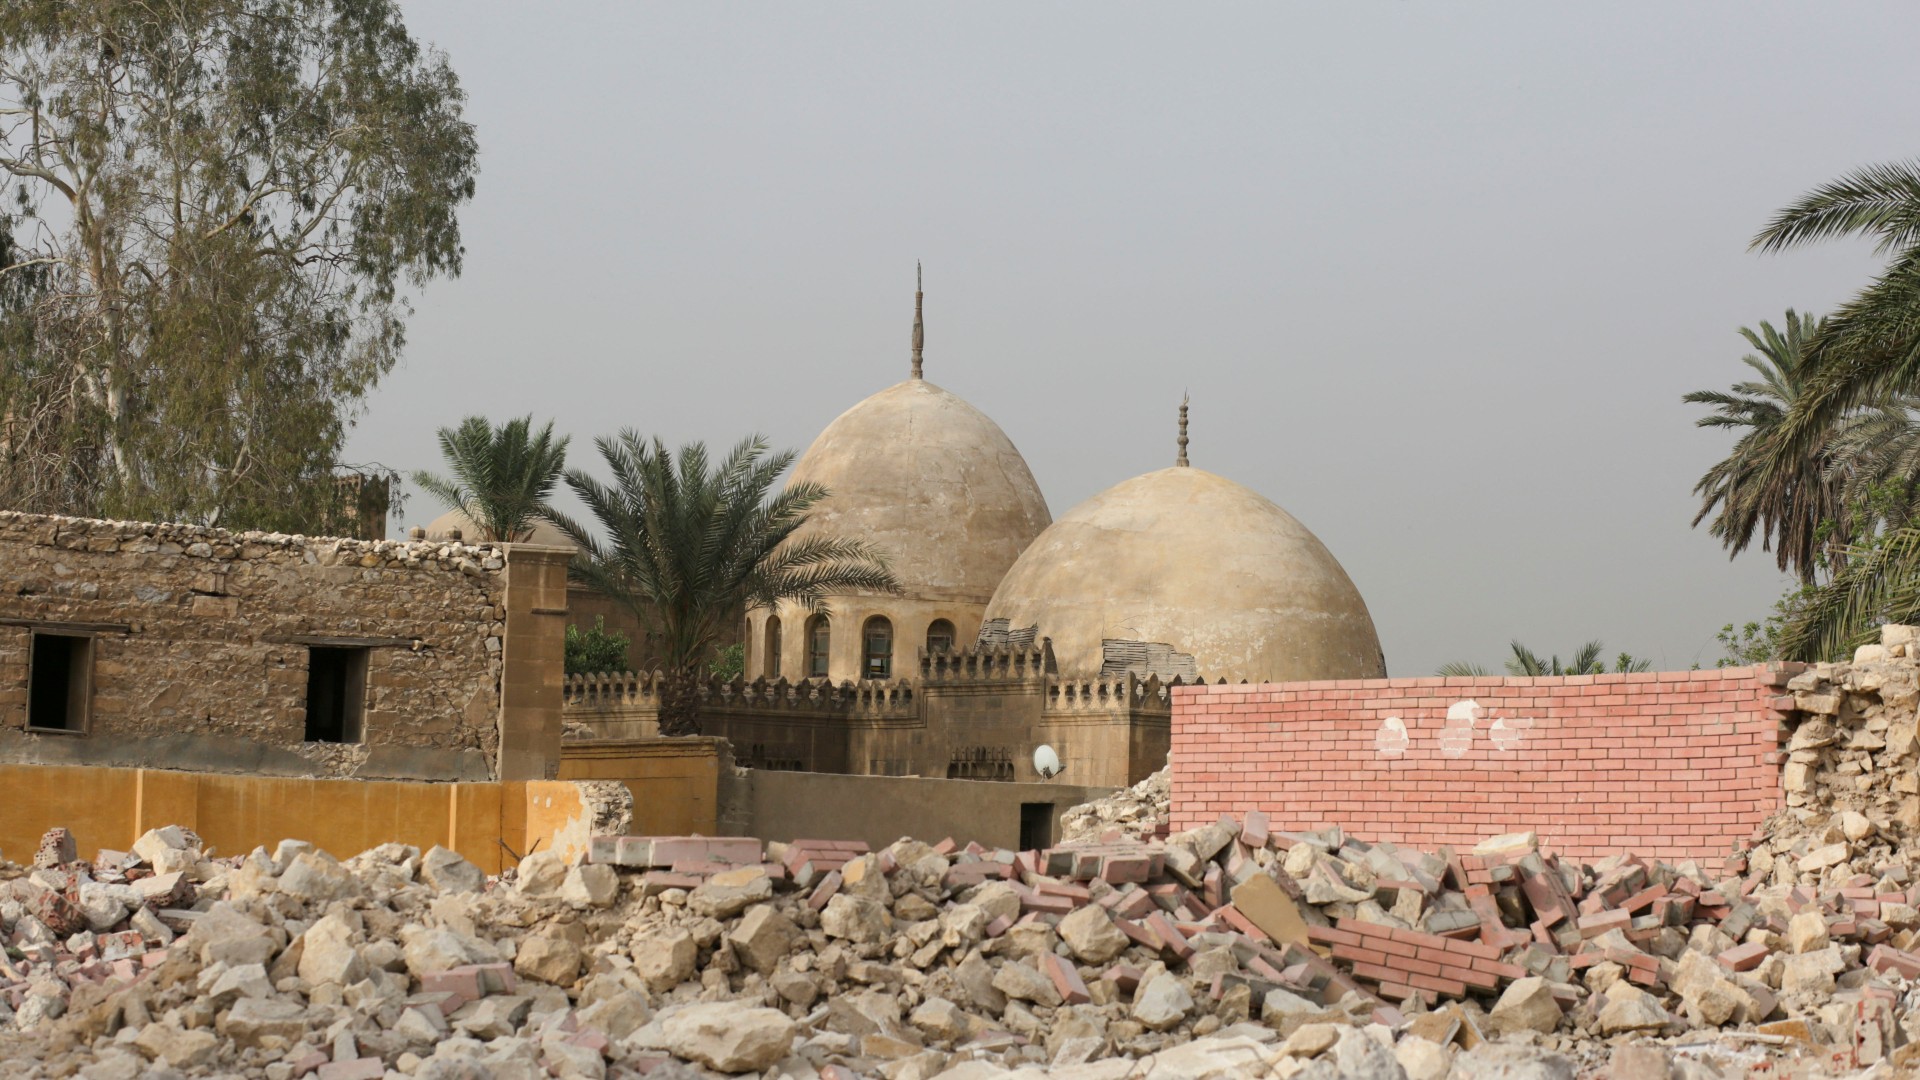 The cemeteries that were demolished in Qarafa Imam al-shafi'i where a new construction project at the Salah Salem Road is underway, Cairo on 31 May, 2023